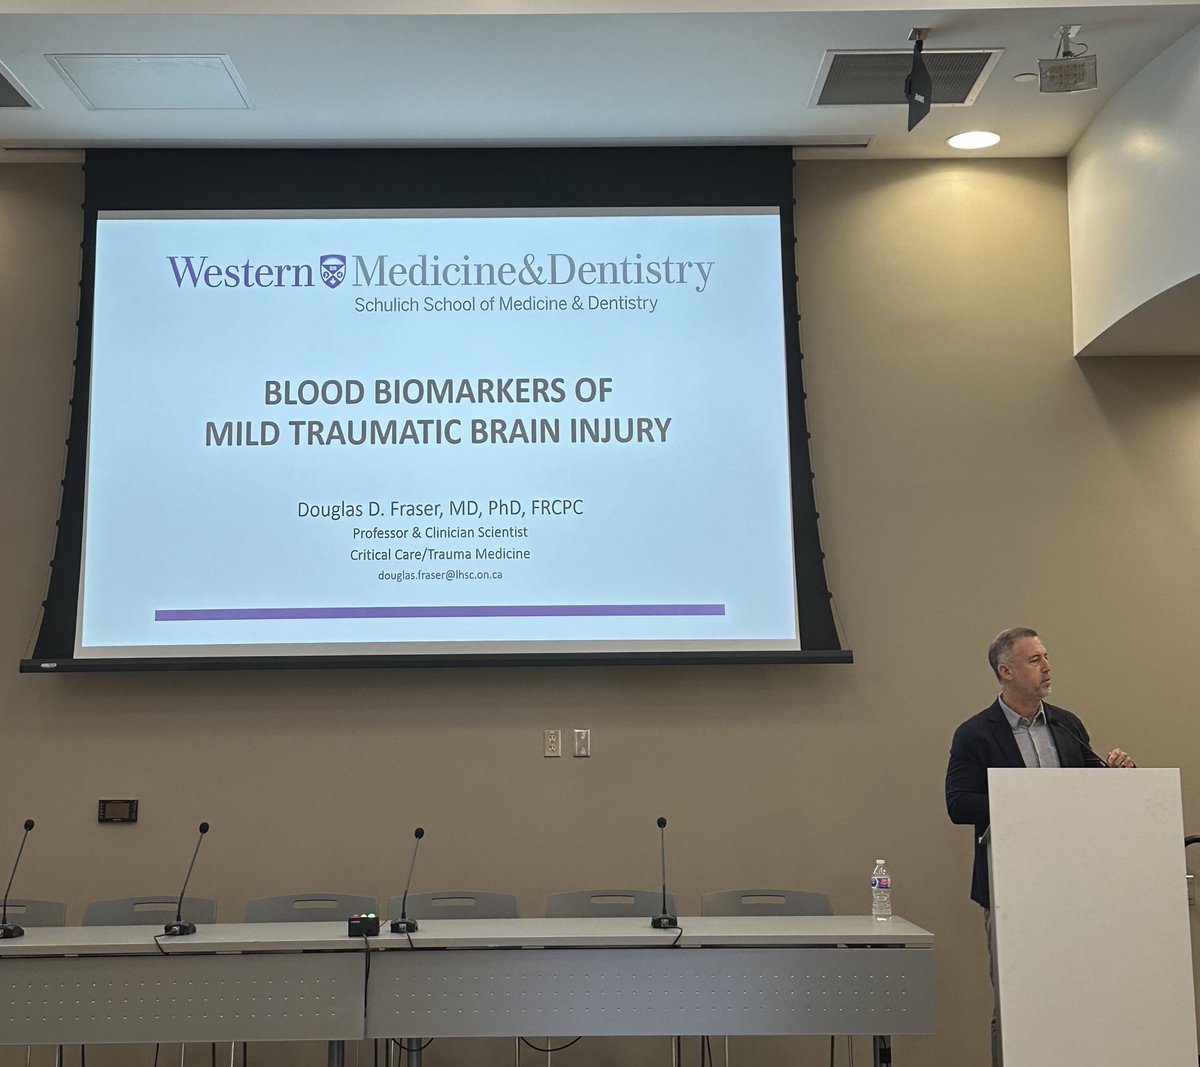 It was a pleasure to have Dr. Fraser here at our 11th Annual Research Symposium to speak about his fascinating research on blood biomarkers of mTBI